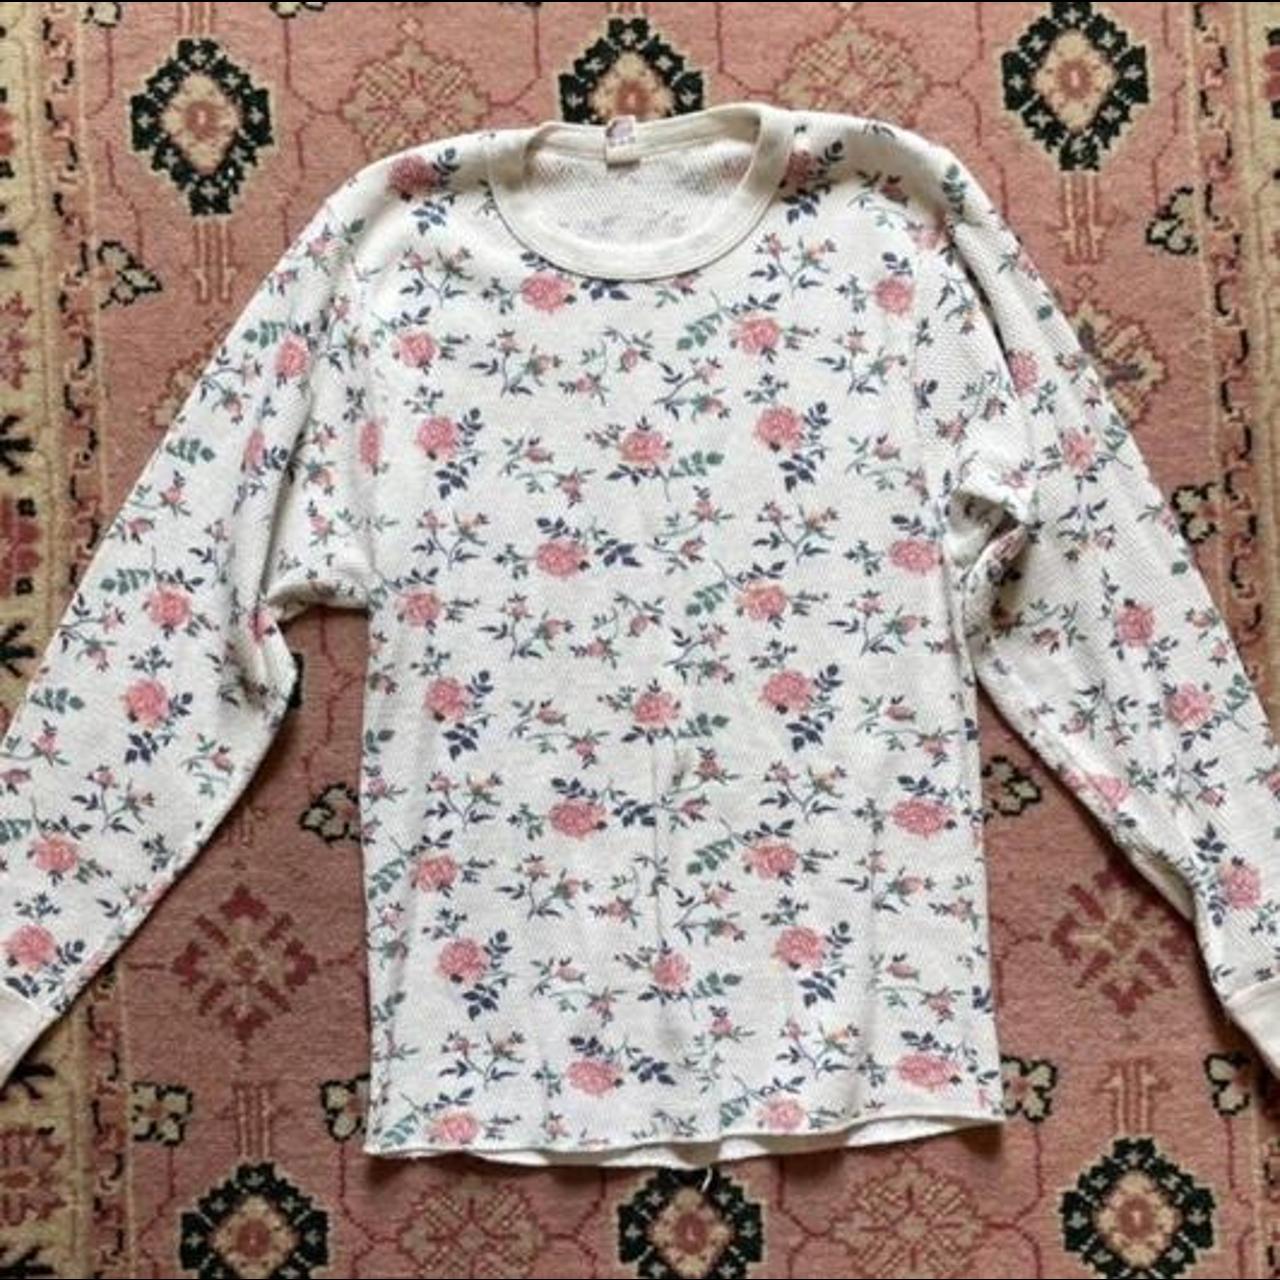 Product Image 3 - ˖⁺‧₊˚♡˚₊‧⁺˖lauren brooke white floral thermal